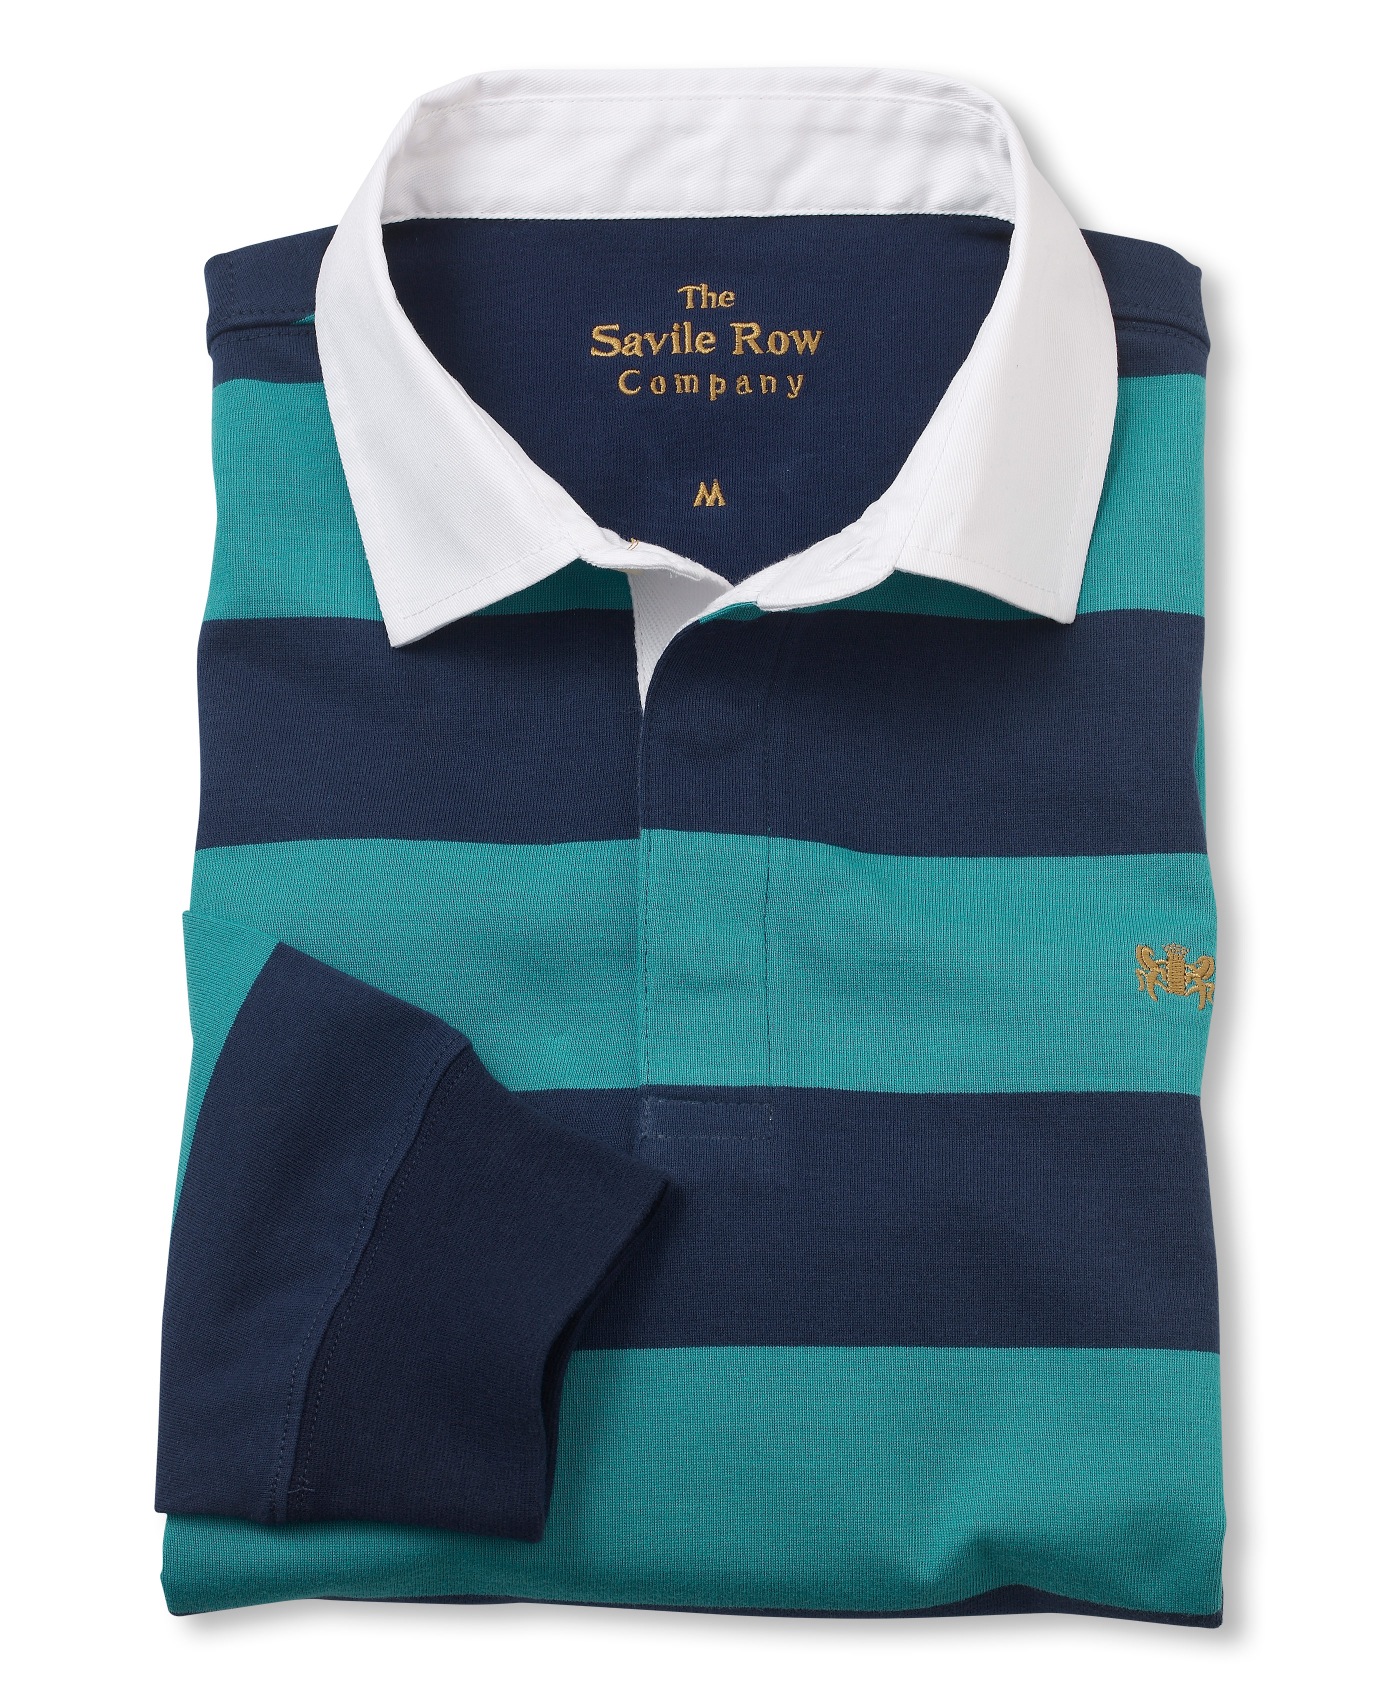 Savile Row Co. Teal Blue Navy Stripe Rugby Shirt L